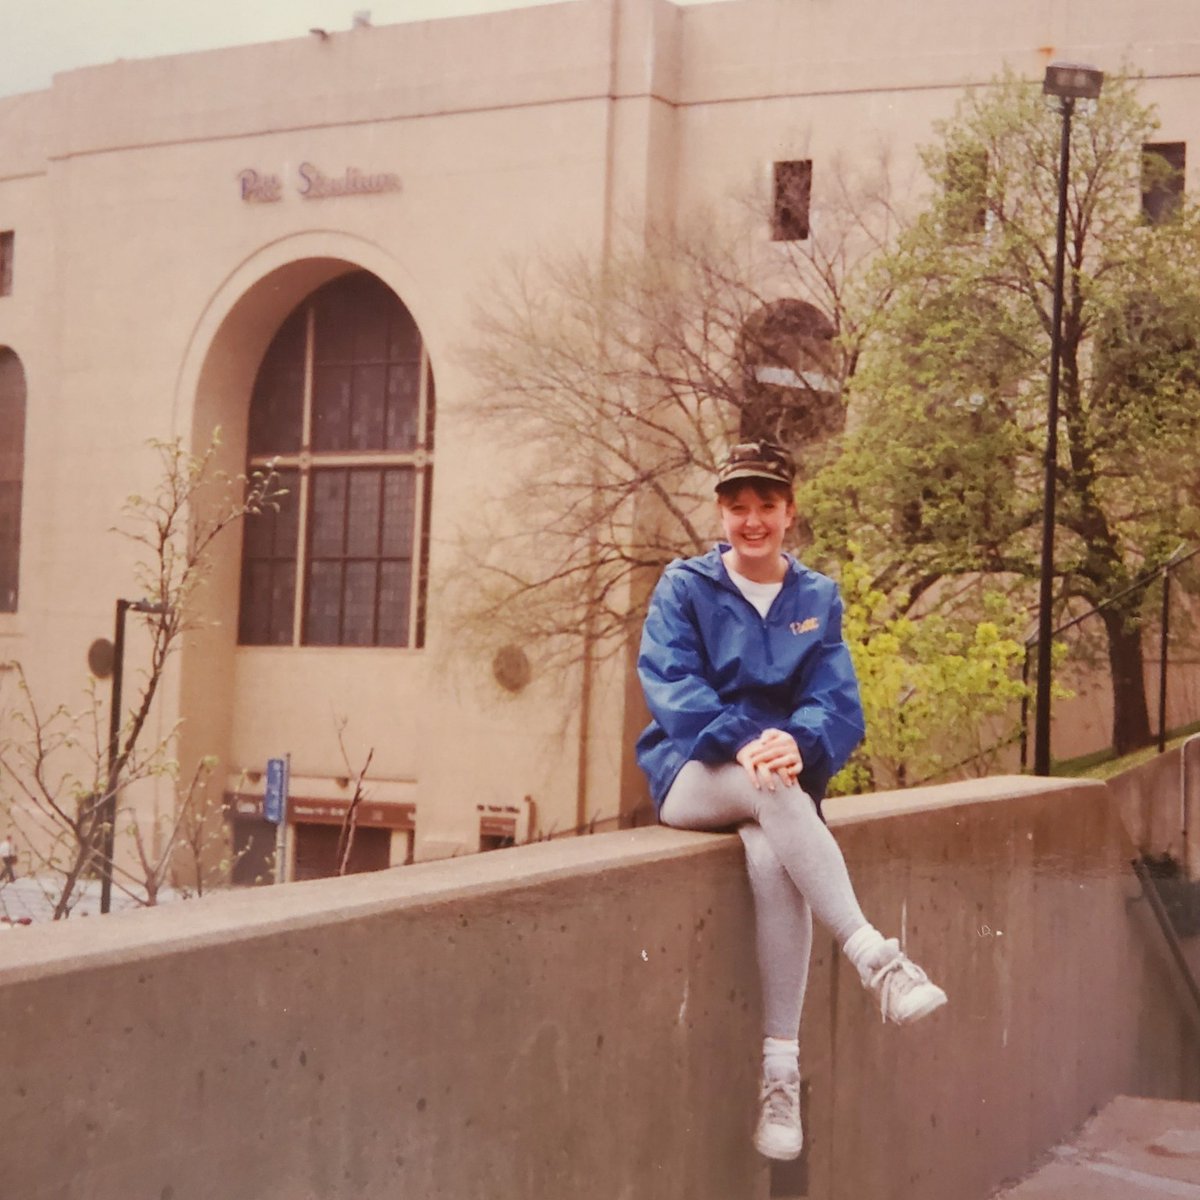 My home, and favorite memories of Pittsburgh at Pitt! Climbing the hill up to PA Hall! Happy 412 day!
@PittPantherBlog @PittTweet @PittAlumni
#412Day #Pittsburgh #pittgal 
#H2P @Pitt_FB @Pitt_ATHLETICS 
@PittSHRS CO'95 🖤💛💙